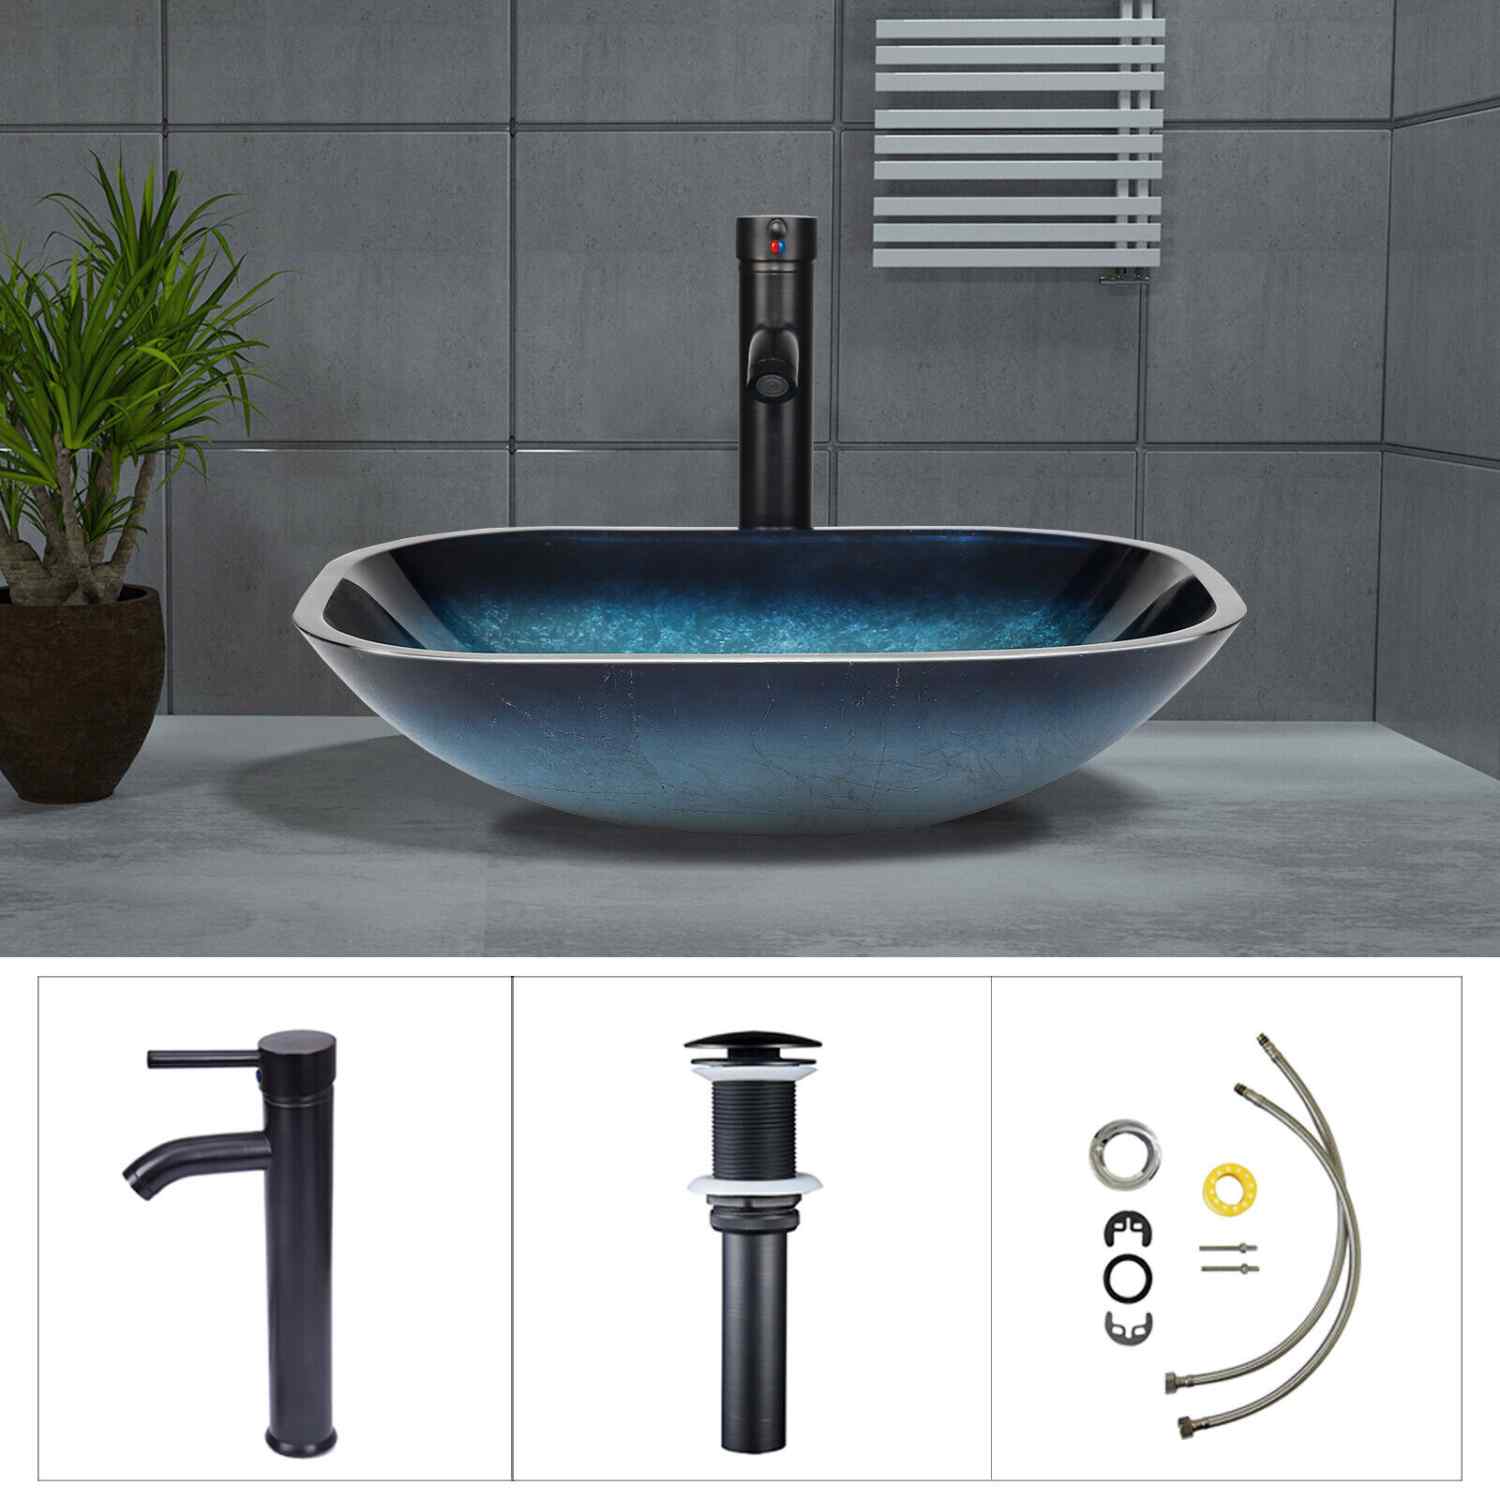 Elecwish square blue sink included parts